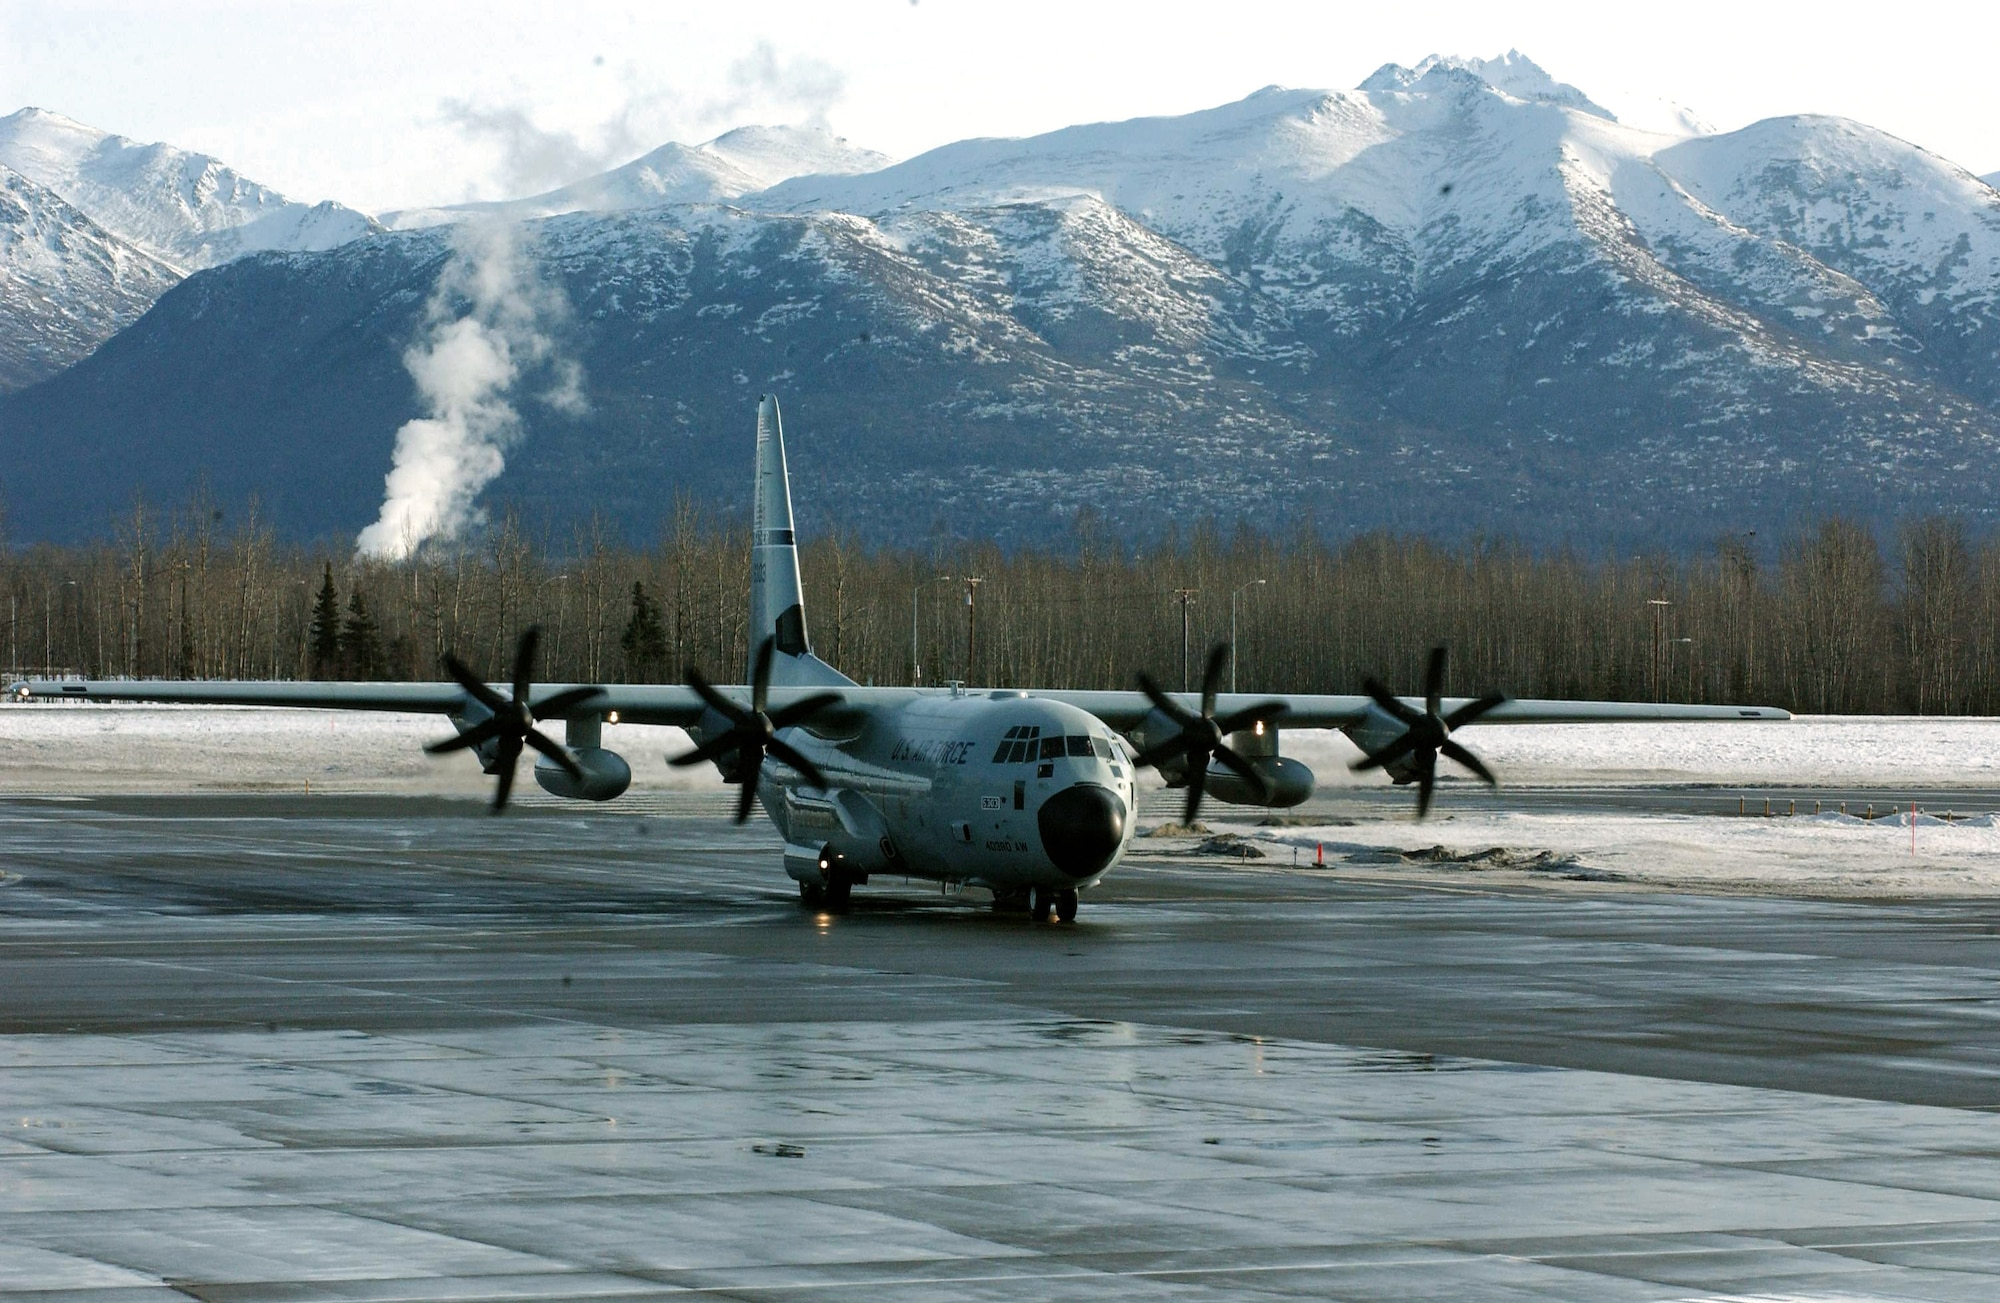 A WC-130J readies for takeoff at Elmendorf Air Force Base, Alaska. Reserve Hurricane Hunters of the 403rd Wing from Keesler AFB, Miss., deployed for a month to collect weather data ahead of pending winter storms. The data they collect increases the accuracy of the National Weather Service forecast by 10 to 20 percent. (U.S. Air Force photo/Tech. Sgt. James B. Pritchett) 
